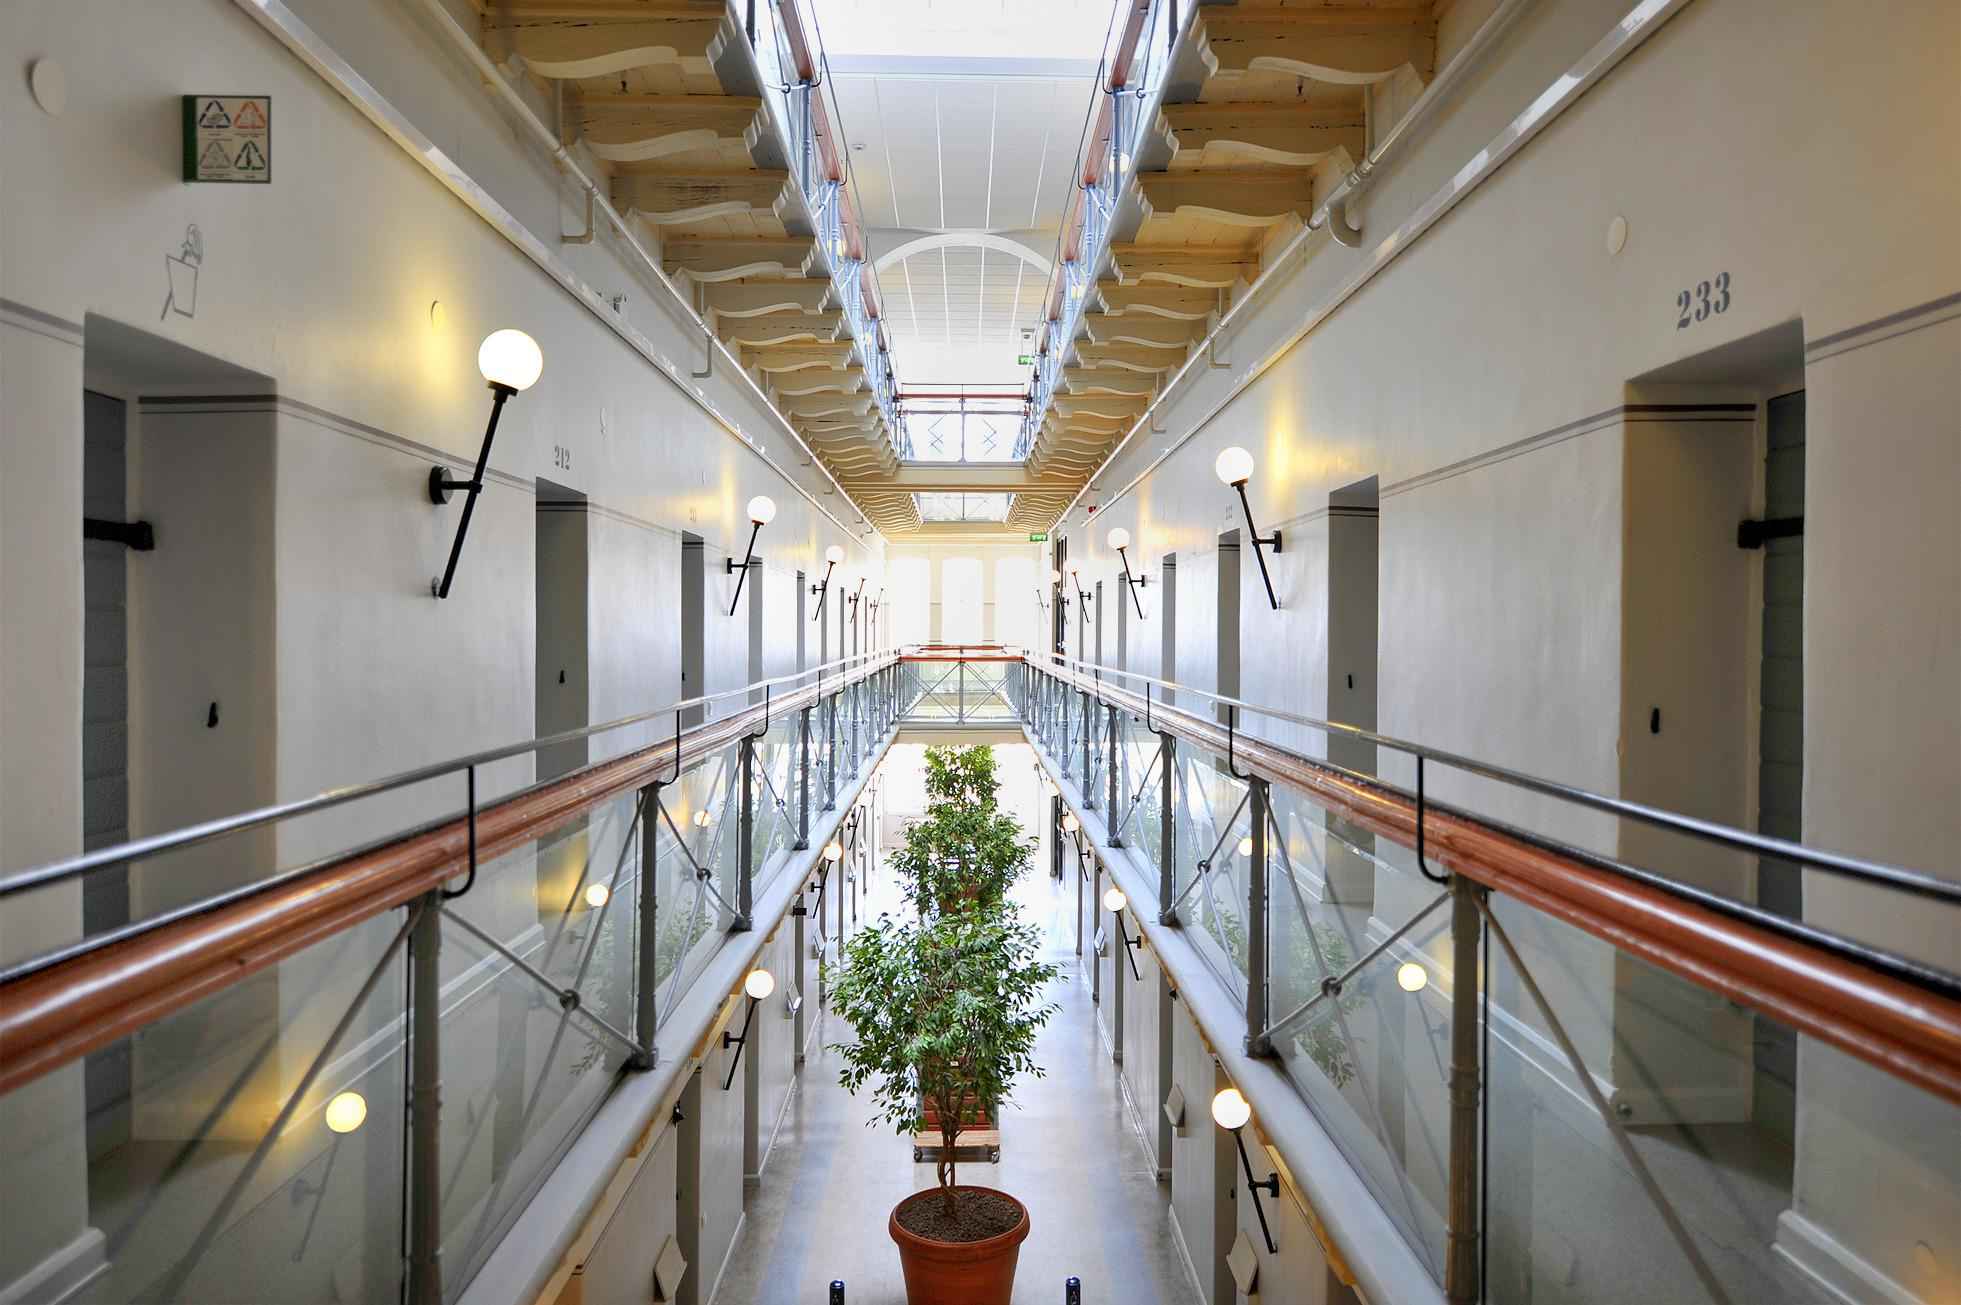 A long corridor with doors on each side, inside the STF Långholmen Vandrarhem which was once a prison.